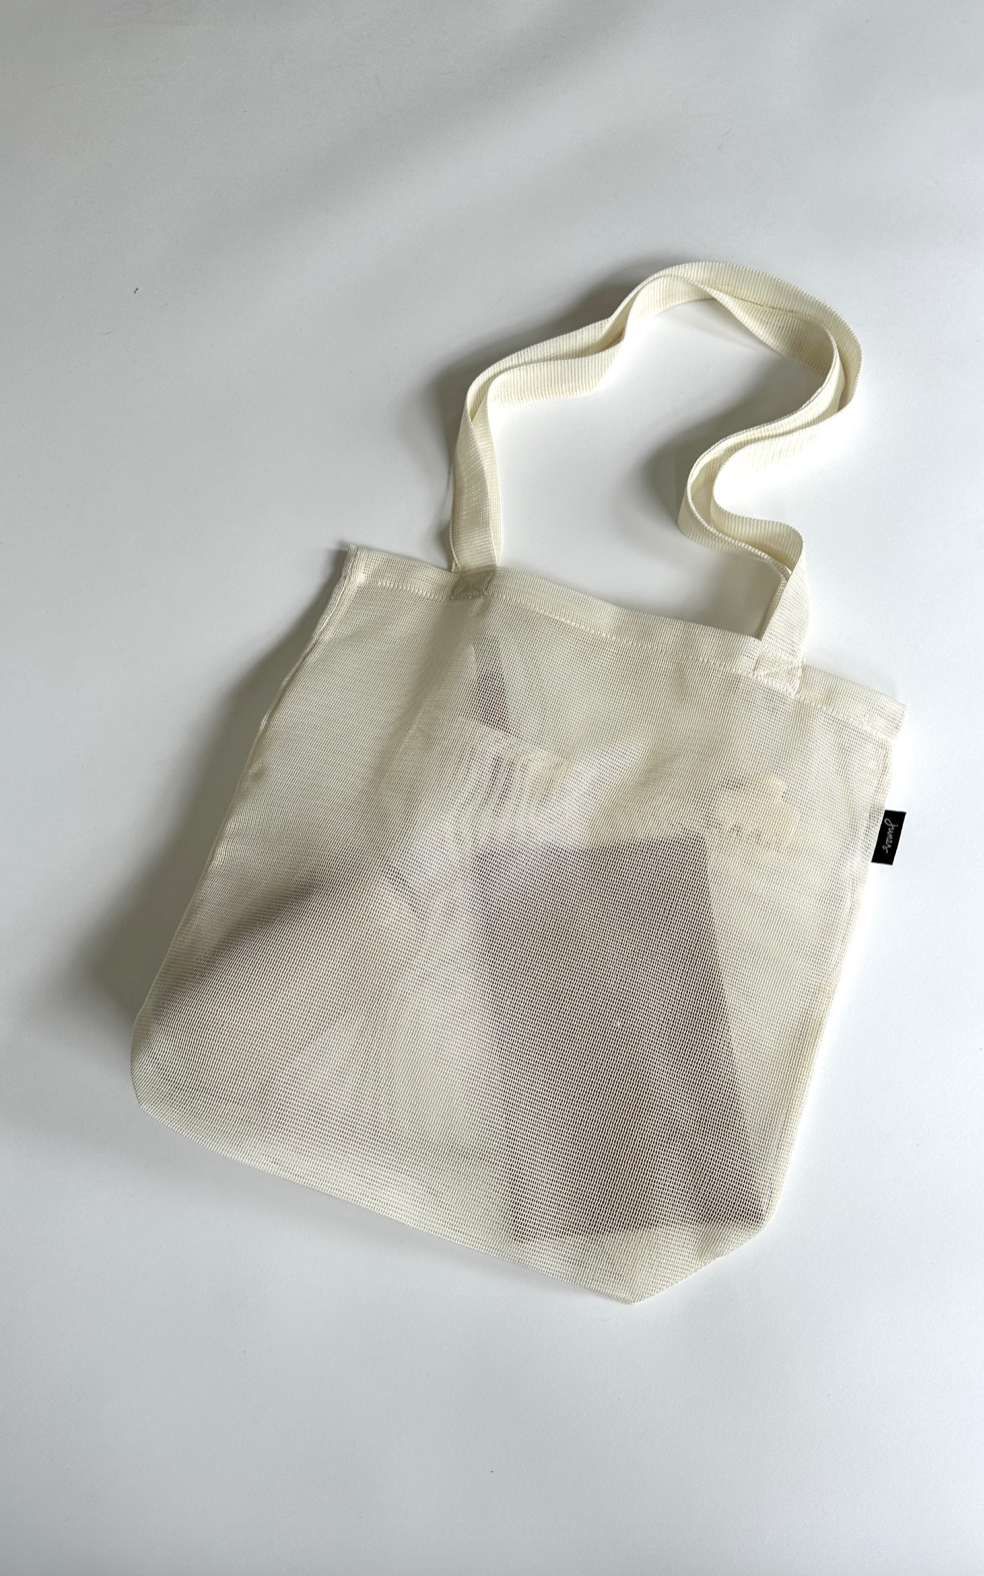 Bio-Knit Totes in Ivory